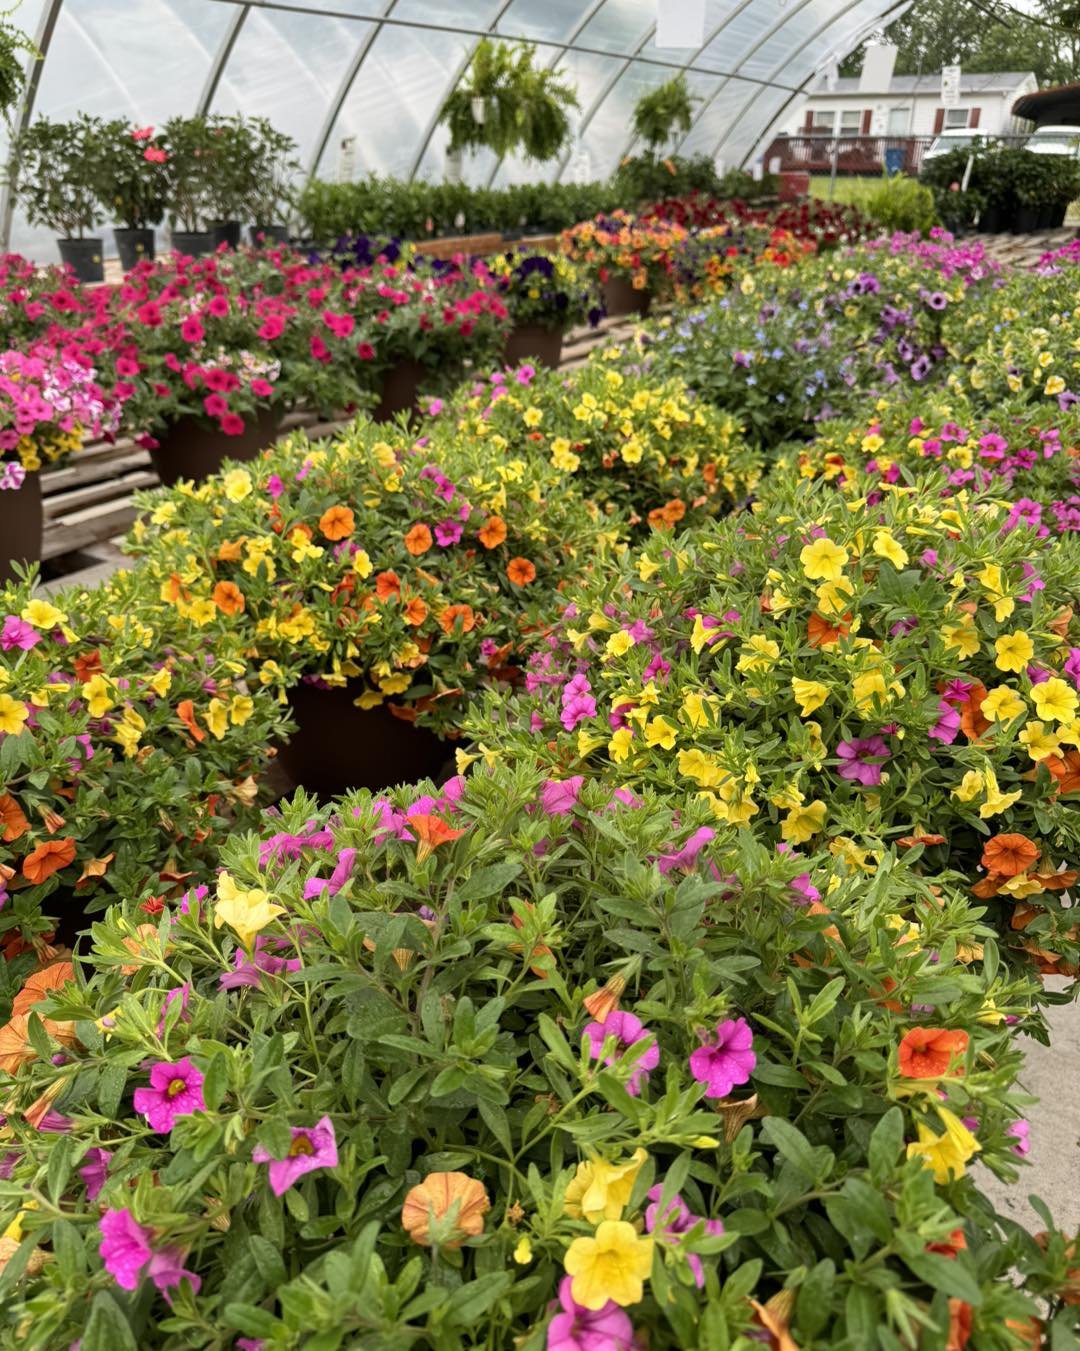 After a super busy Mother&rsquo;s Day weekend we are restocking it all!!
.
Fresh loads of bedding plants, patio pots, ferns, hanging baskets are arriving daily and our nursery is stocked!
.
Come see us 😎